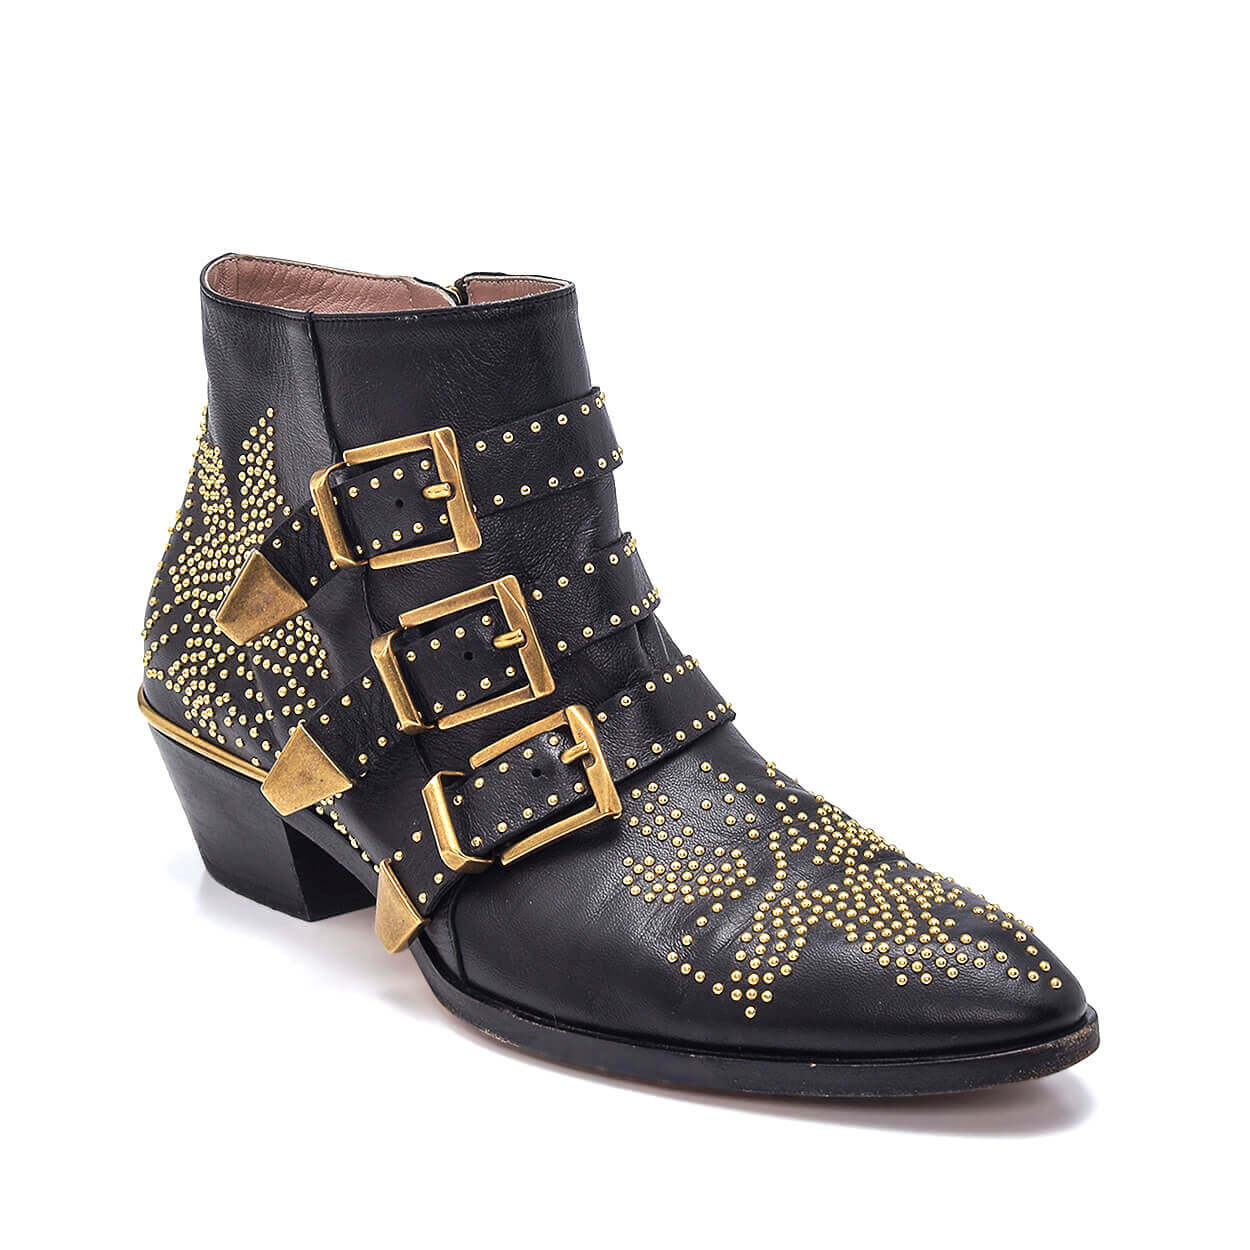 Chloe - Black Smooth Nappa Leather Strapped & Studded Susanna Boots